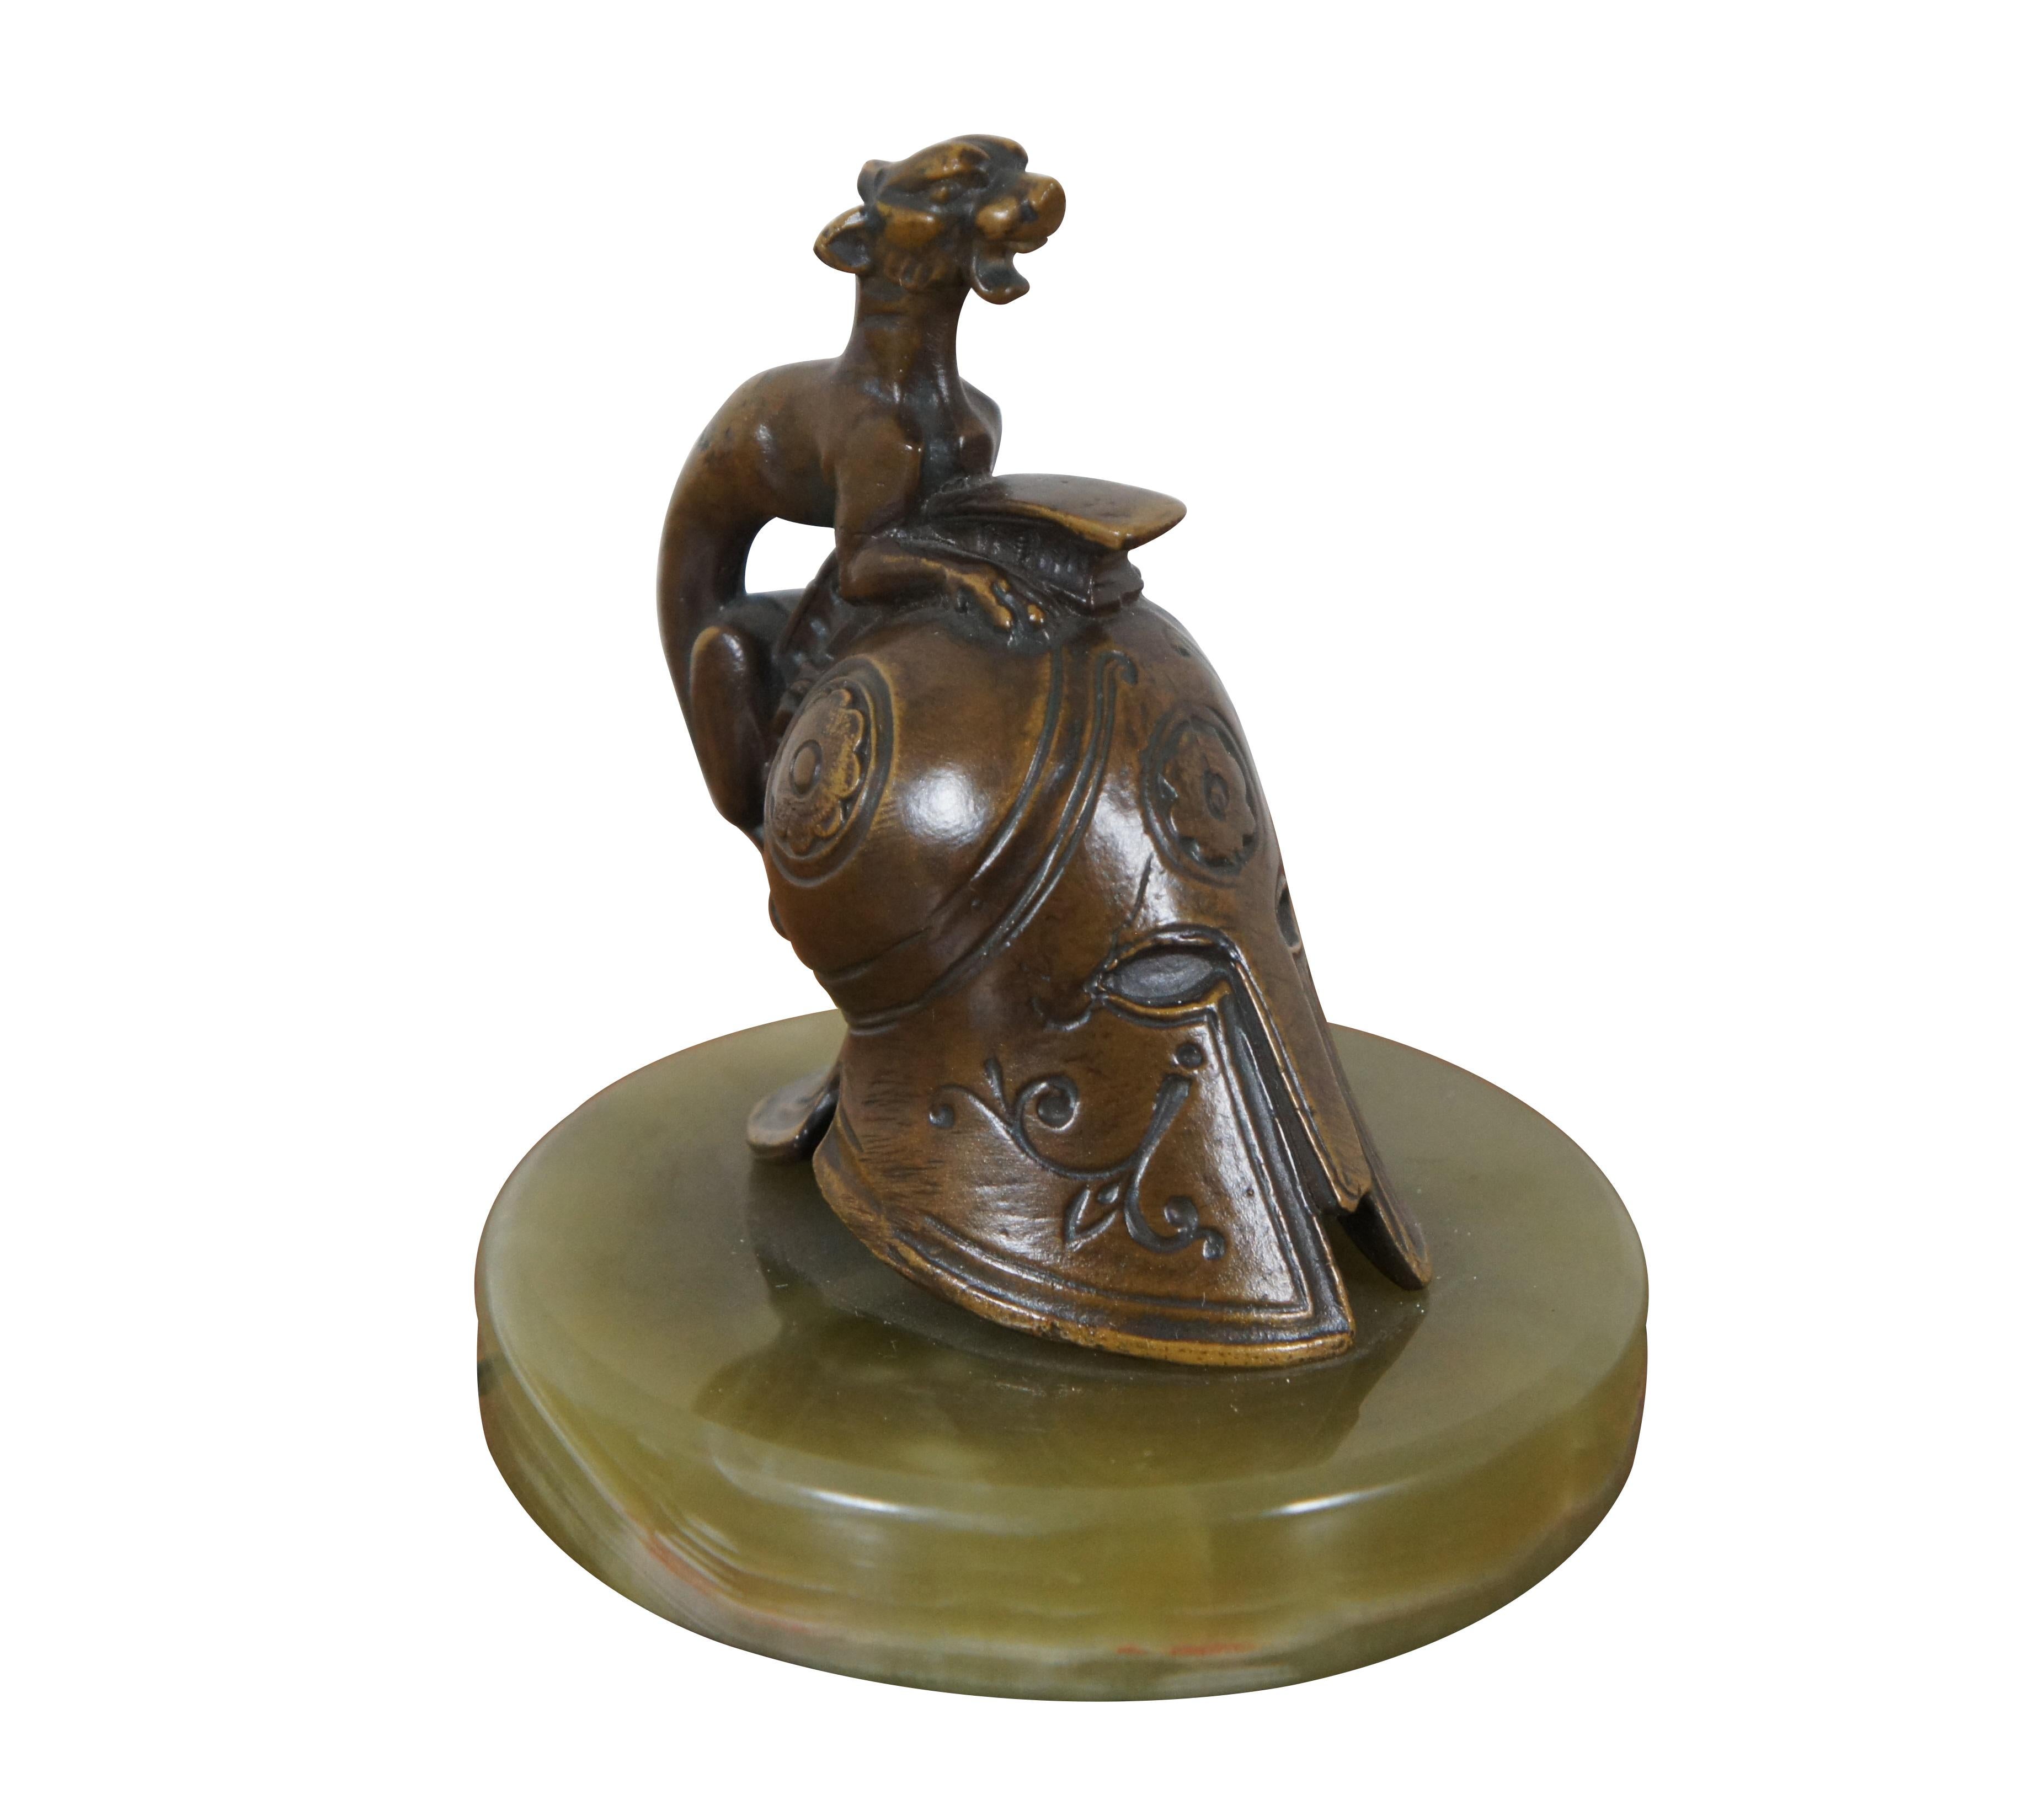 Vintage paperweight or book end featuring a bronze metal Greek / Corinthian / Spartan helmet adorned with a snarling animal, set on a translucent green stone / marble base.

Dimensions:
4